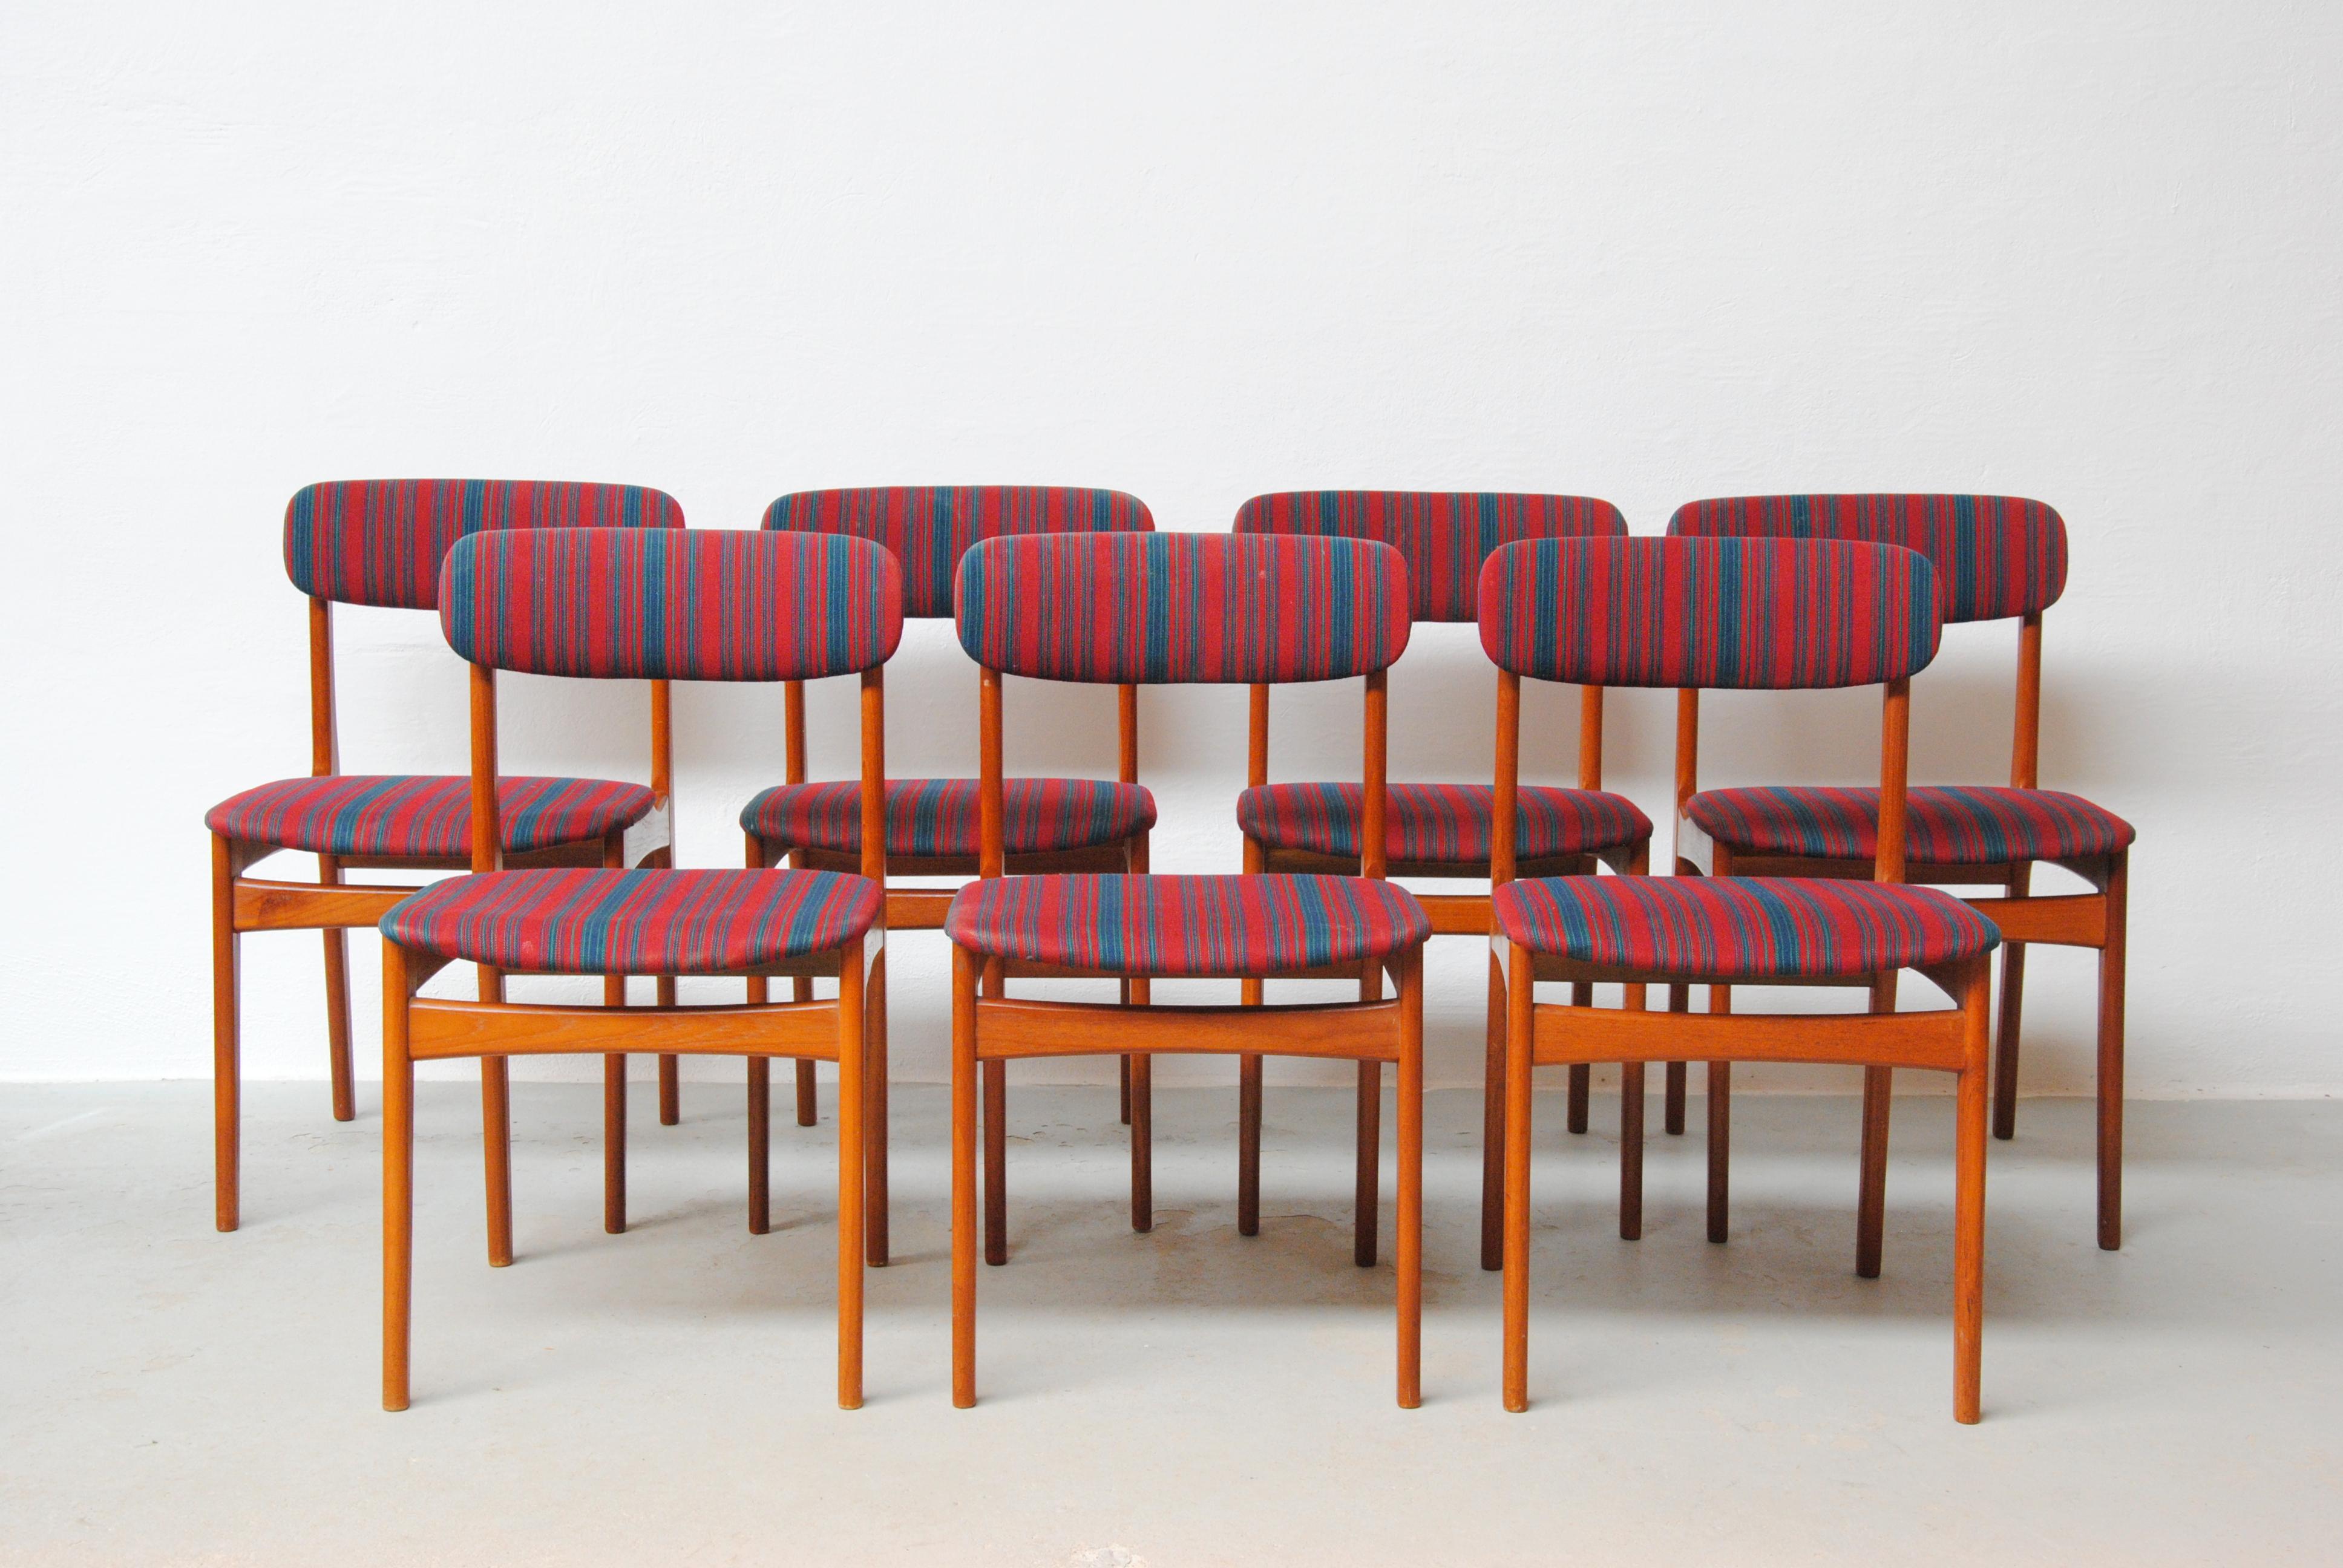 1970's Set of seven restored Danish teak dining chairs by Tarm Stolefabrik.

The set of 7 dining chairs feature a slim minimalistic scandinavian design with small but elegant curves that give the chairs personality on top of good craftmanship in